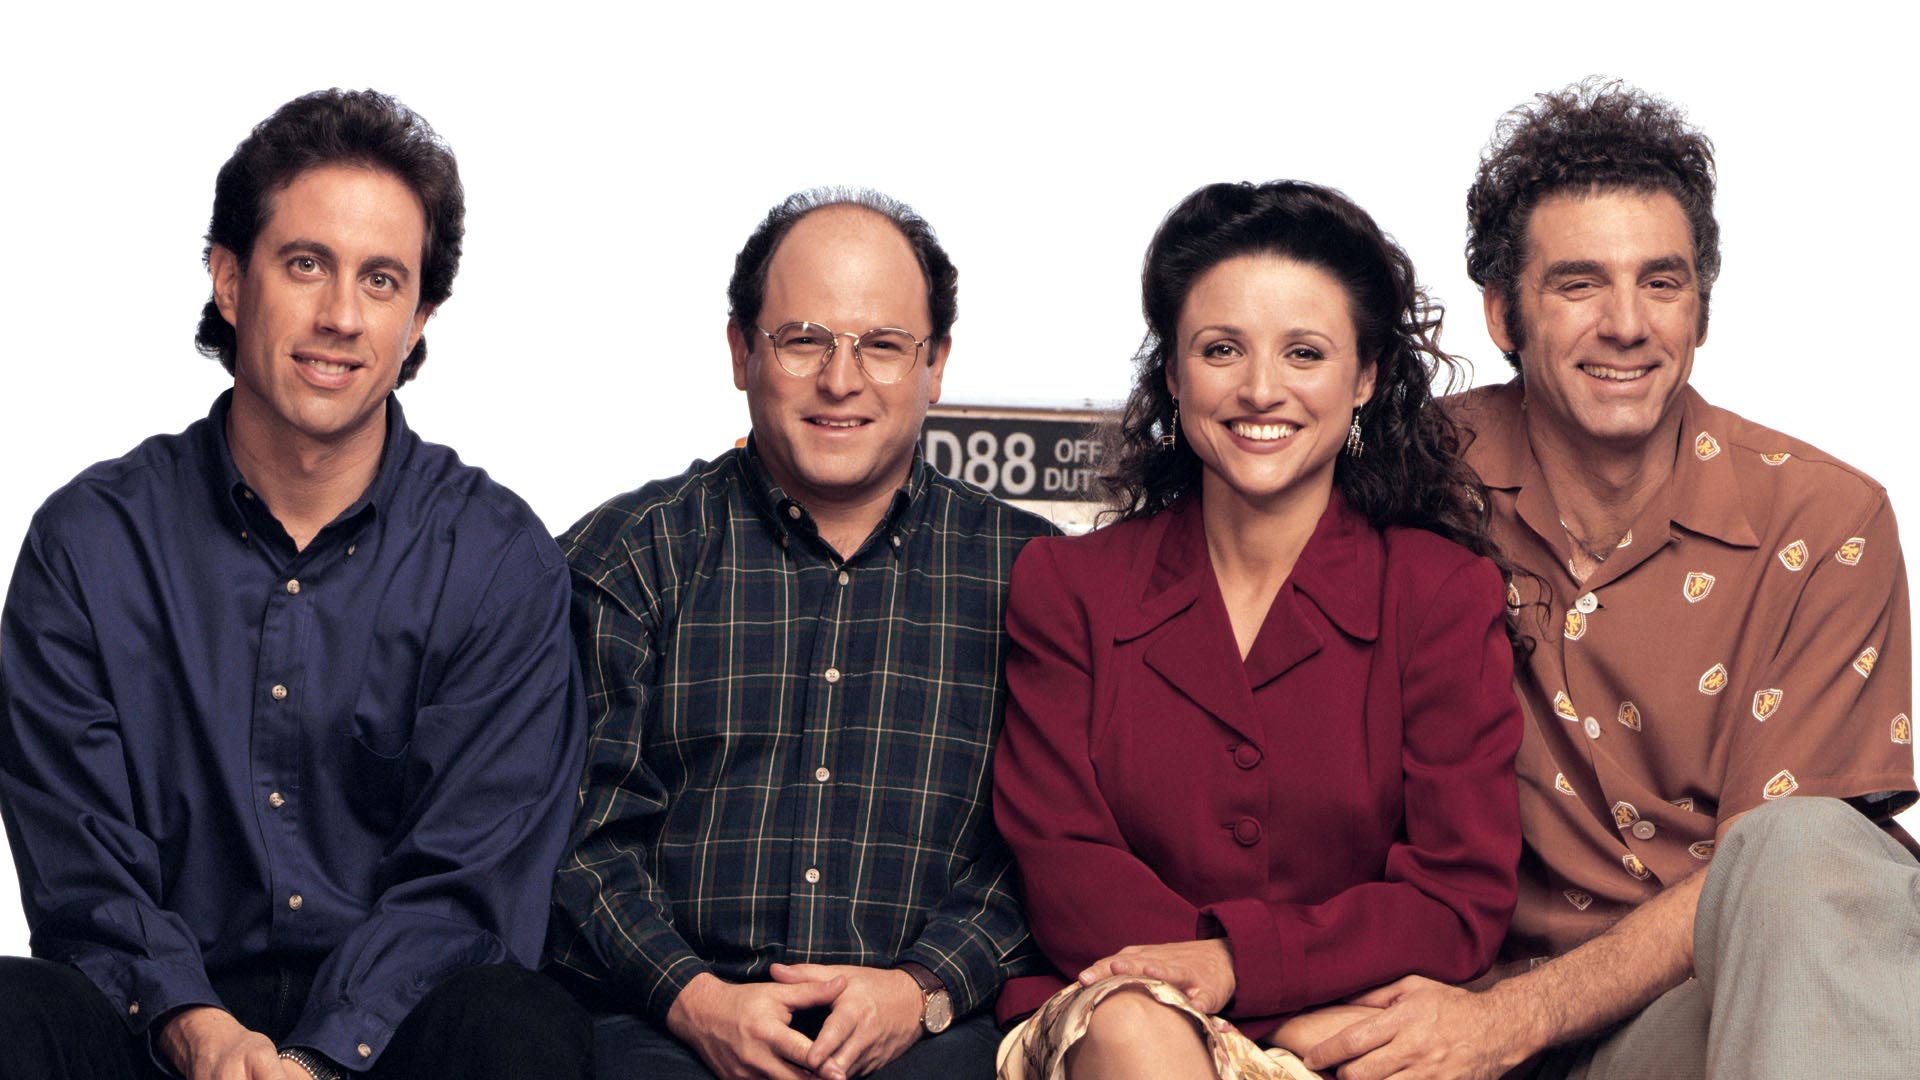 Do You Remember These TV Shows That Aired in the ’90s? Seinfeld